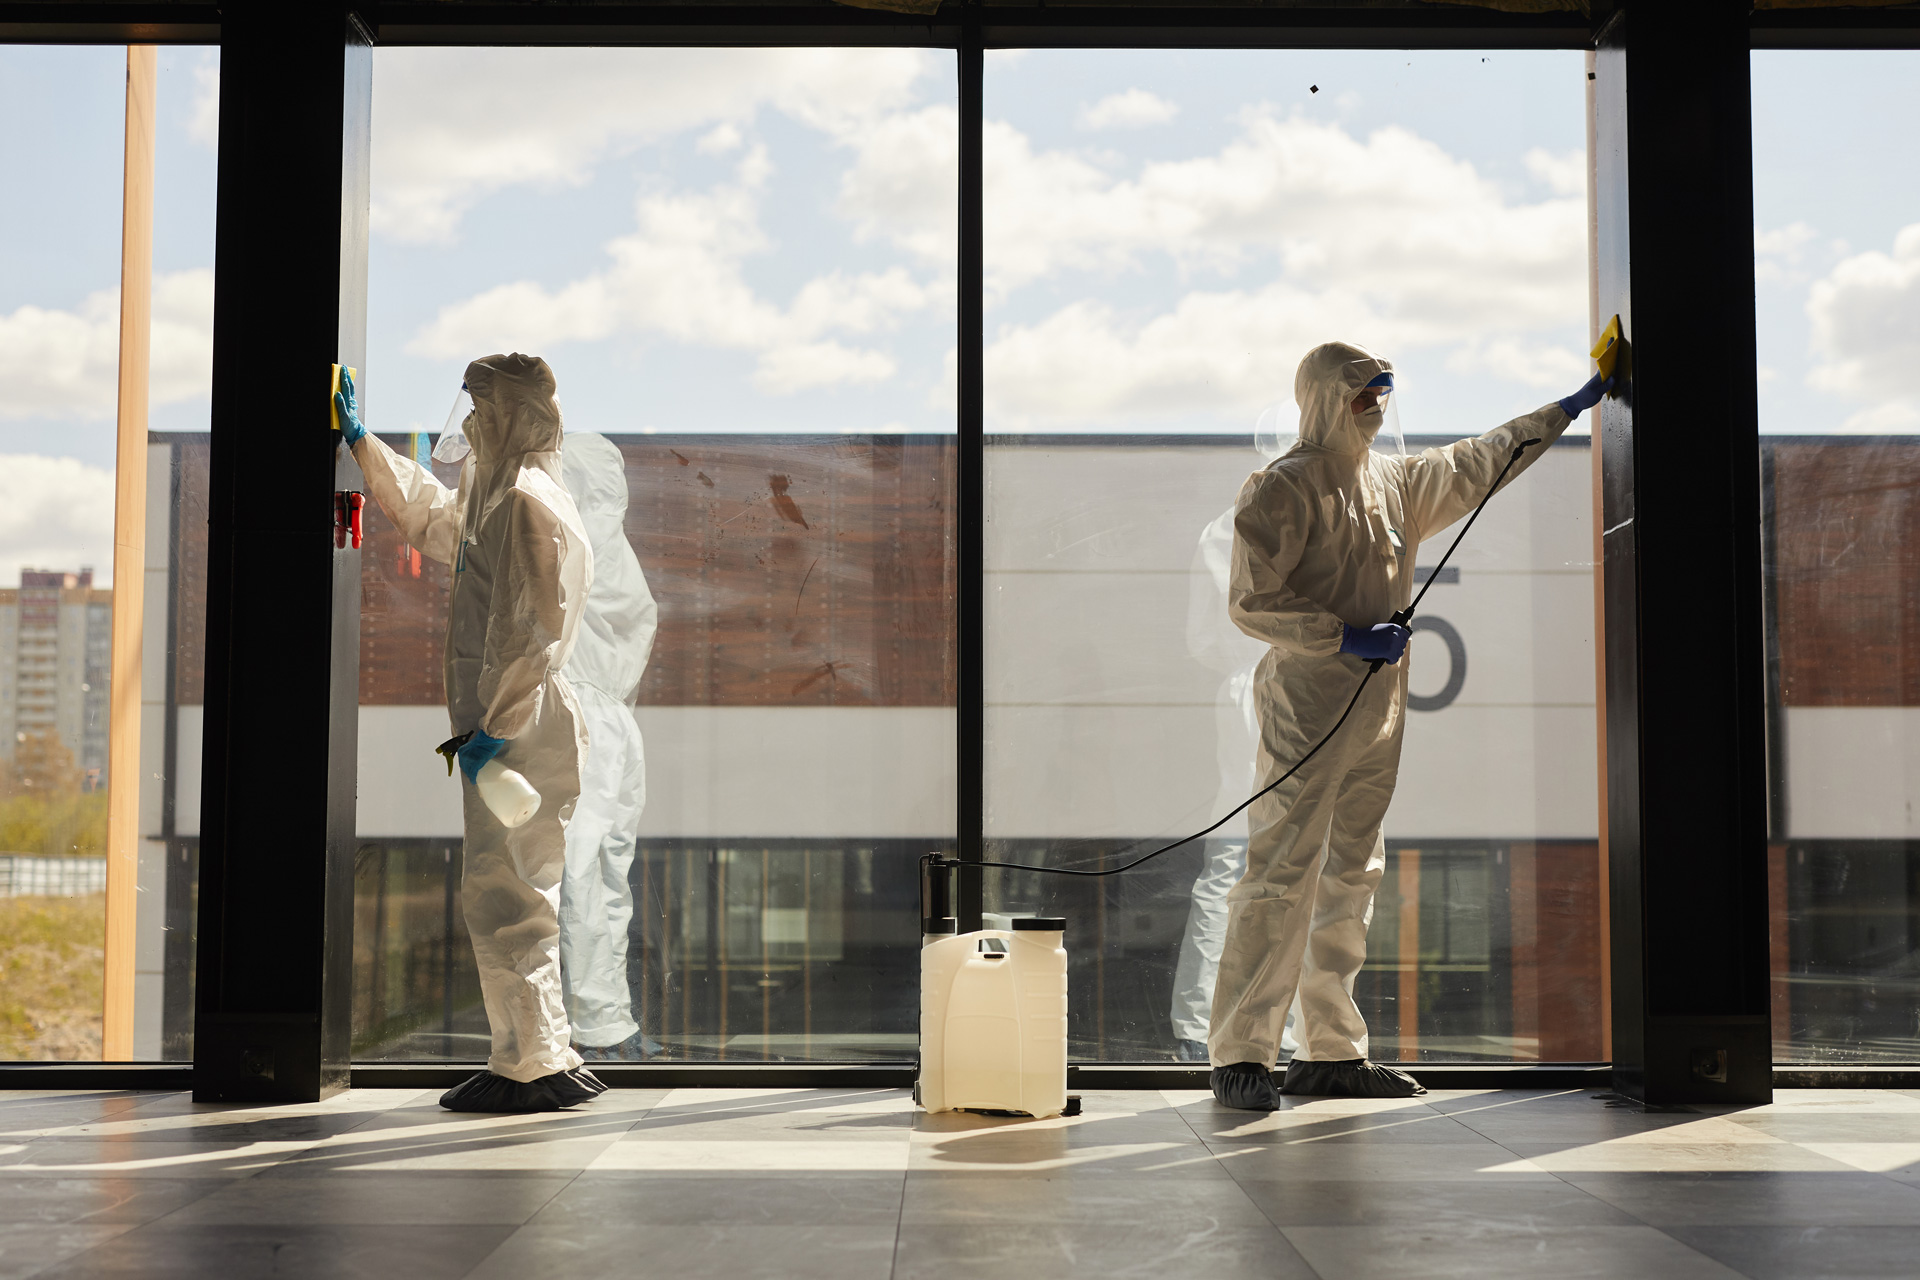 Graphic full length portrait of two workers wearing protective suits cleaning surfaces indoors lit by sunlight, copy space